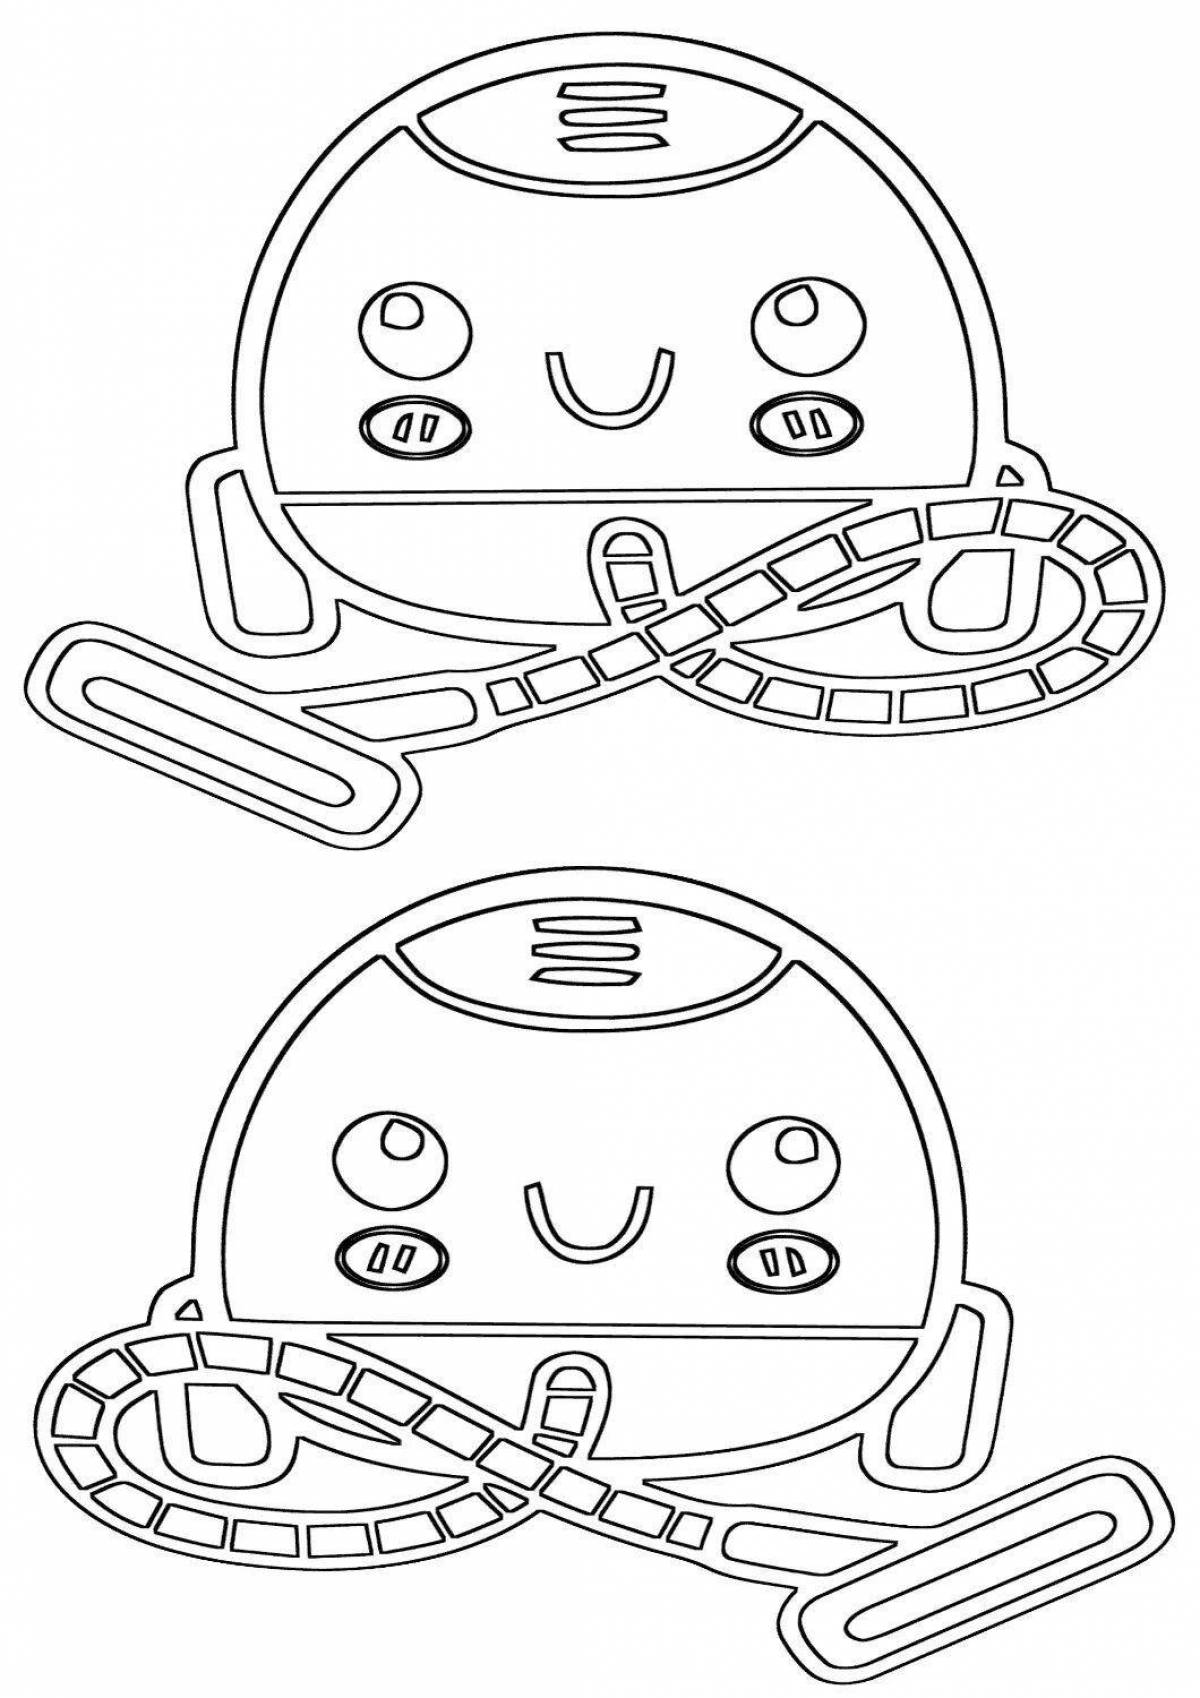 Sweet robot vacuum cleaner coloring pages for boys